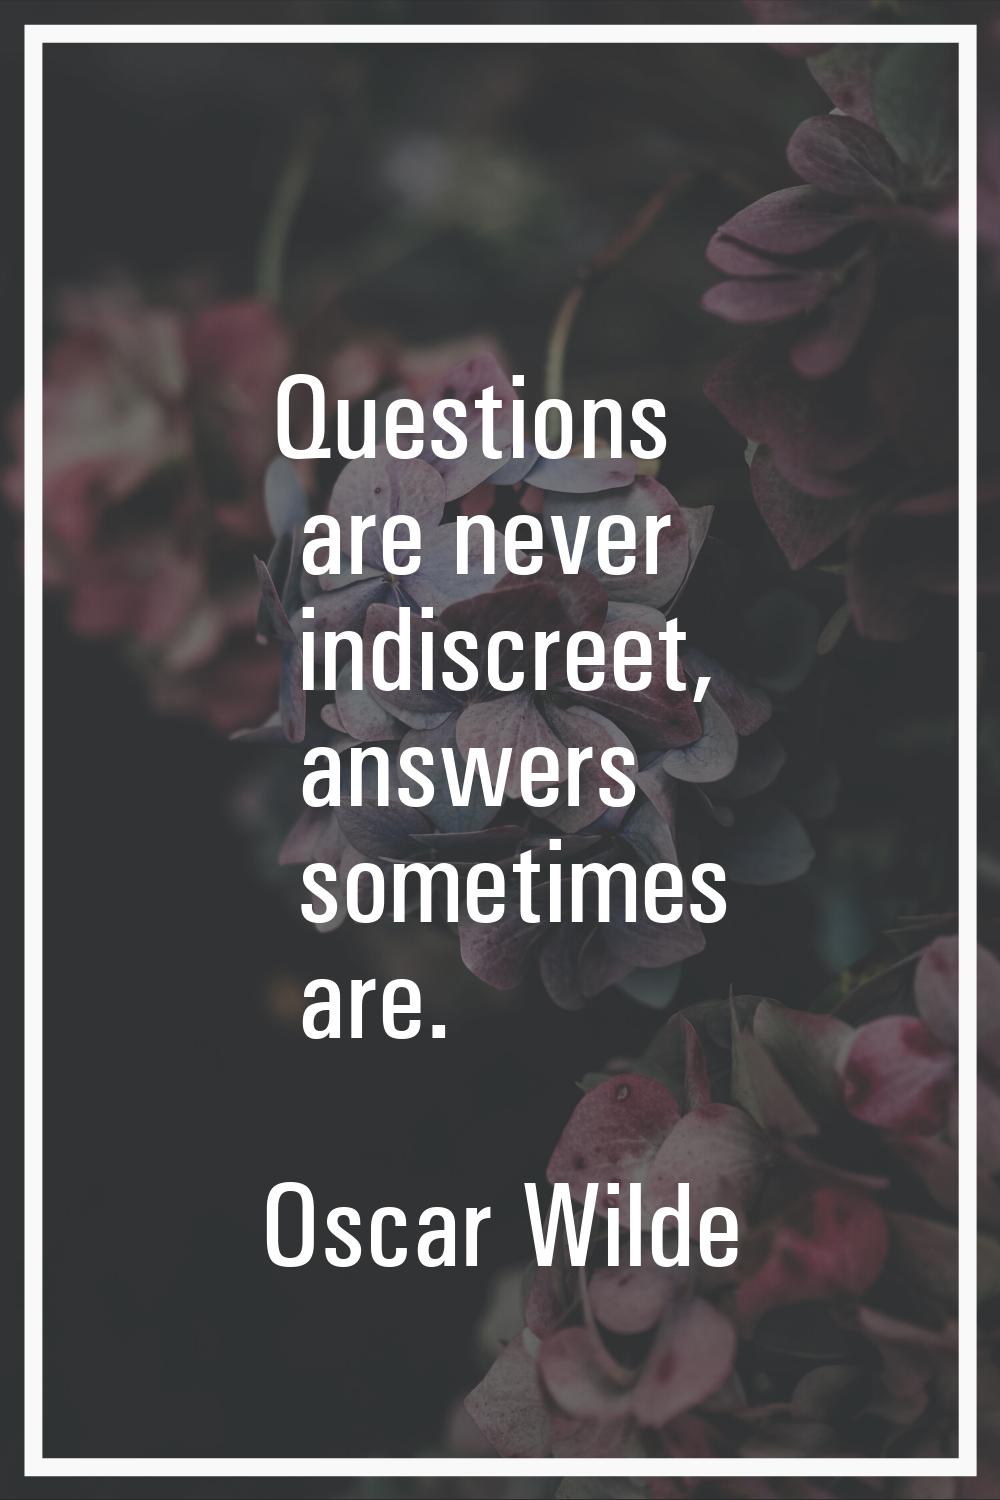 Questions are never indiscreet, answers sometimes are.